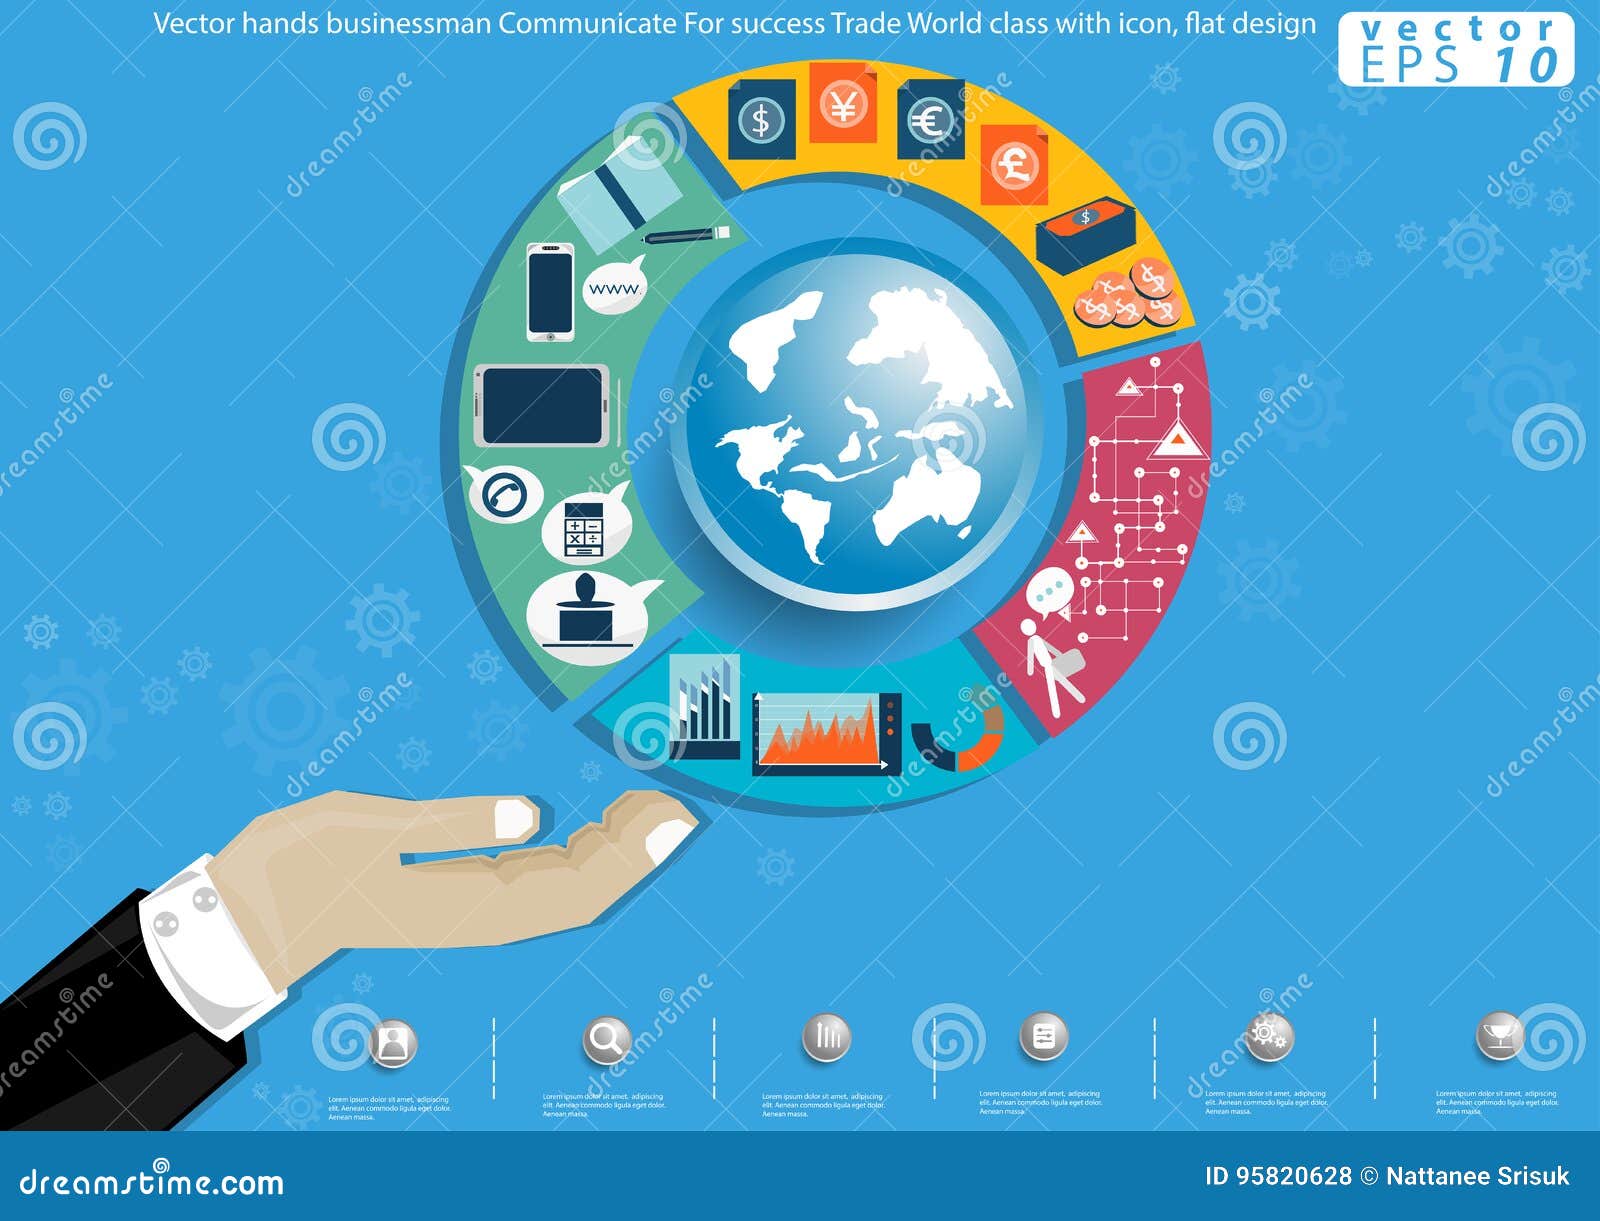 Vector Hands Businessman Communicate For Success Trade World Class With Icon Flat Design Stock Vector Illustration Of Diagram Design